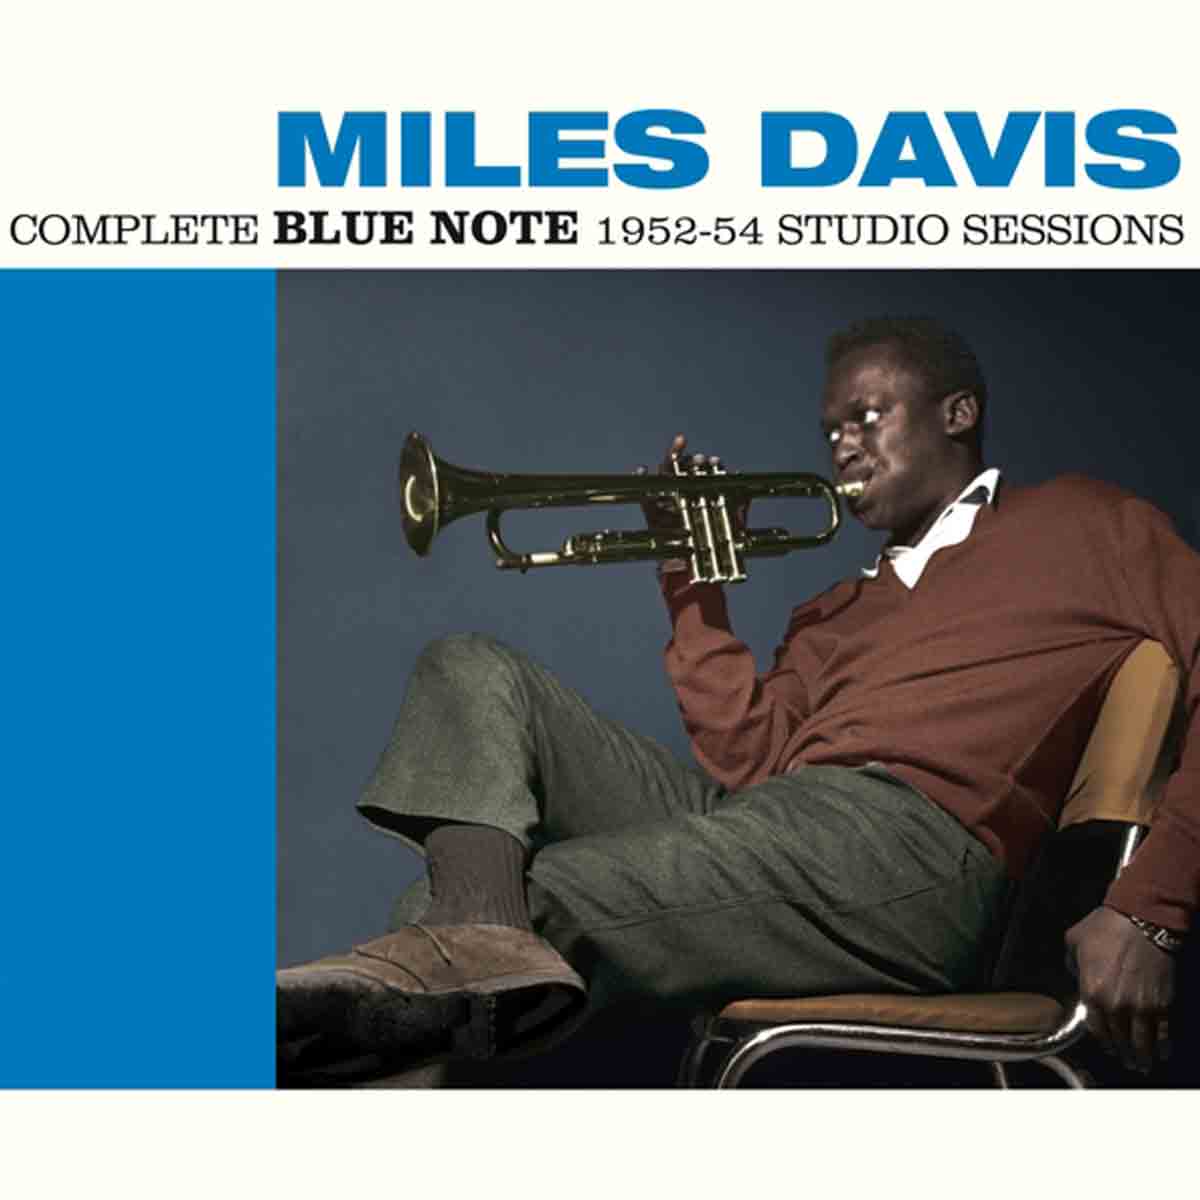 Complete Blue Note 1952-54 Studio Sessions